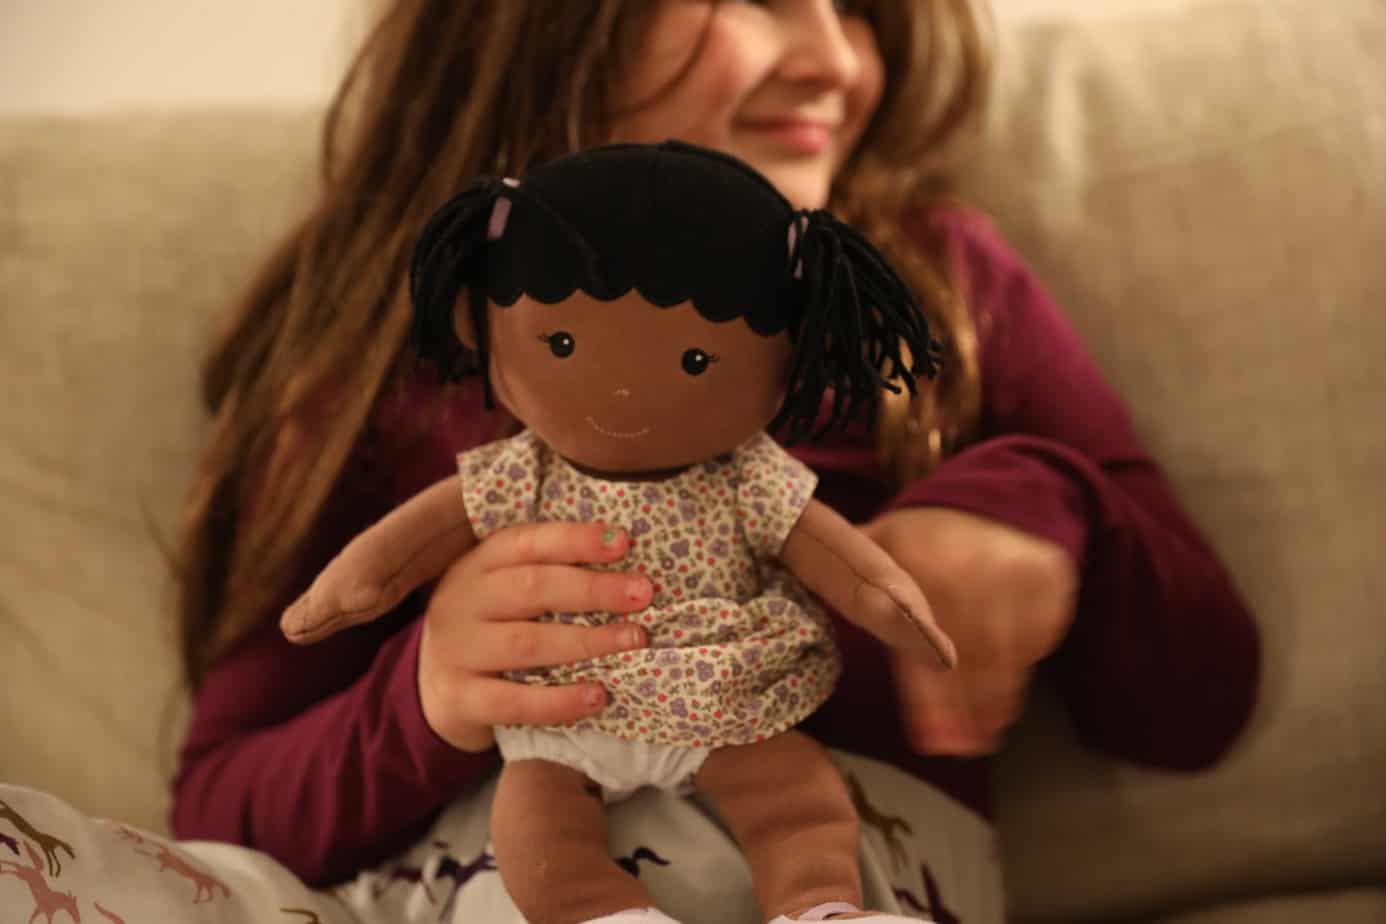 Toy Review: Best Friend Dolls | Stroller In The City